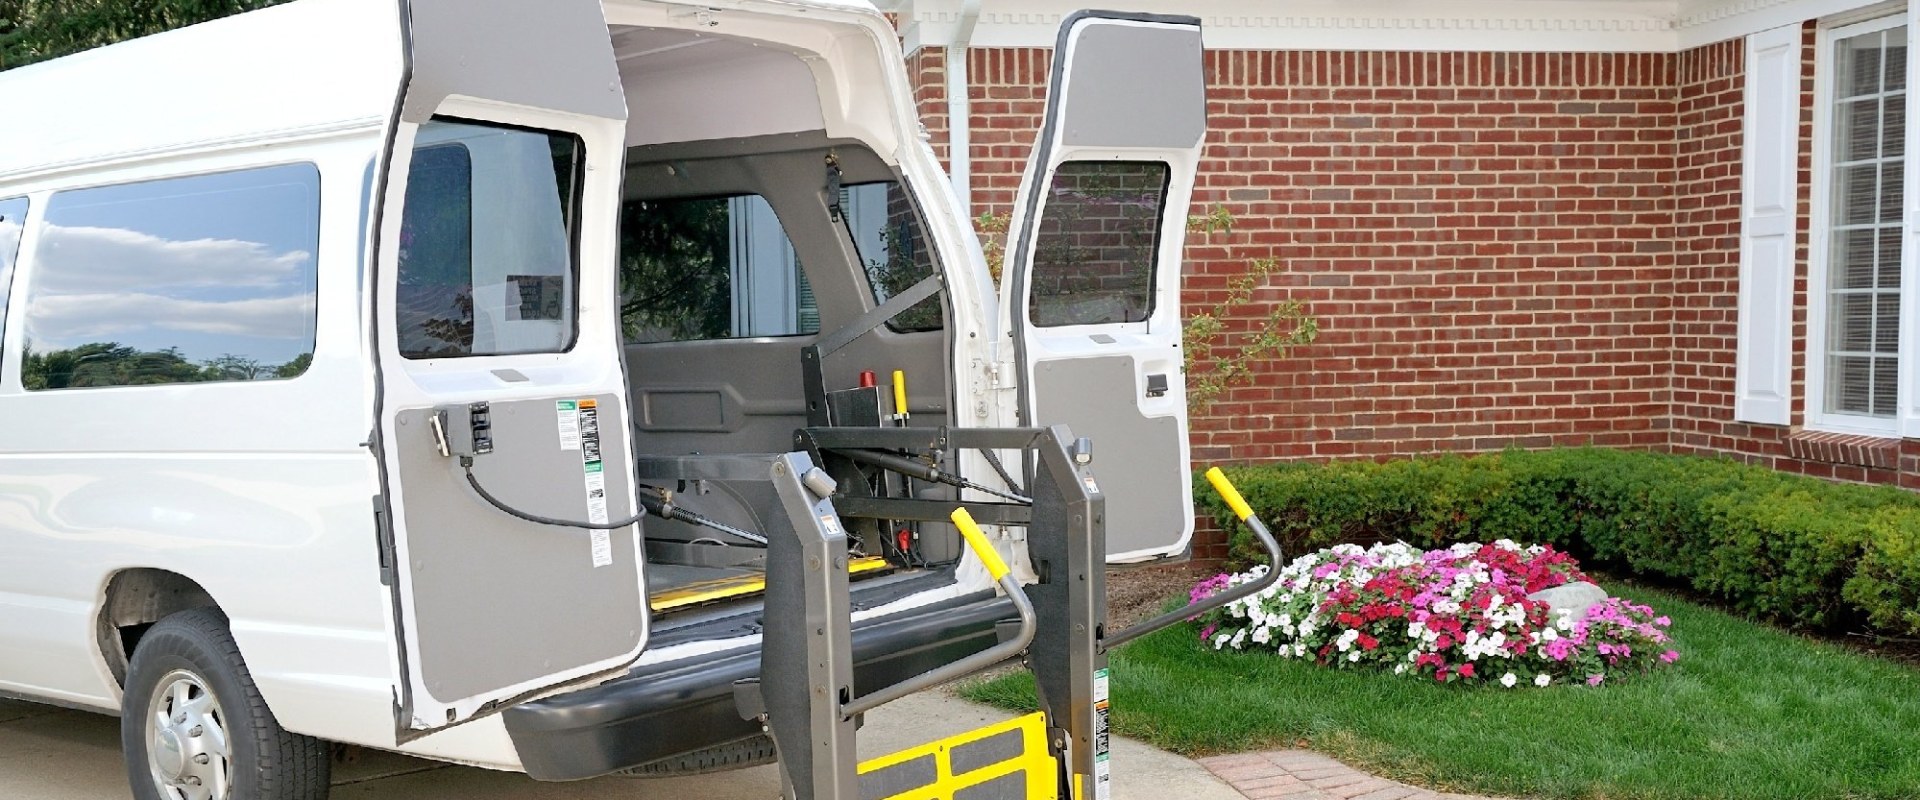 Reliable Transportation Services for Patients in Northern Virginia